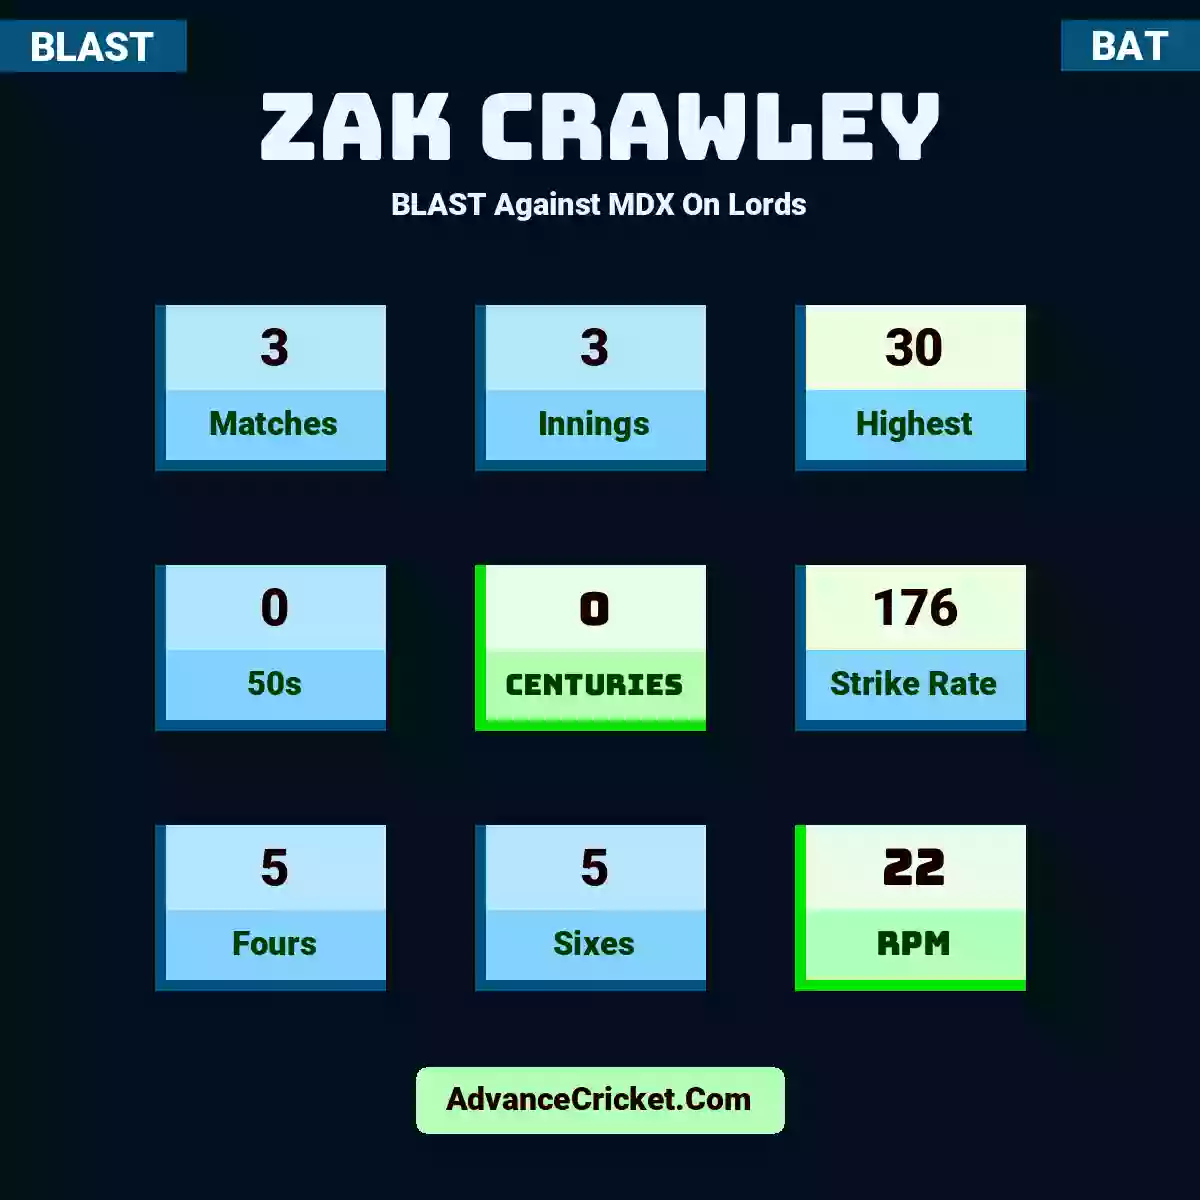 Zak Crawley BLAST  Against MDX On Lords, Zak Crawley played 3 matches, scored 30 runs as highest, 0 half-centuries, and 0 centuries, with a strike rate of 176. Z.Crawley hit 5 fours and 5 sixes, with an RPM of 22.